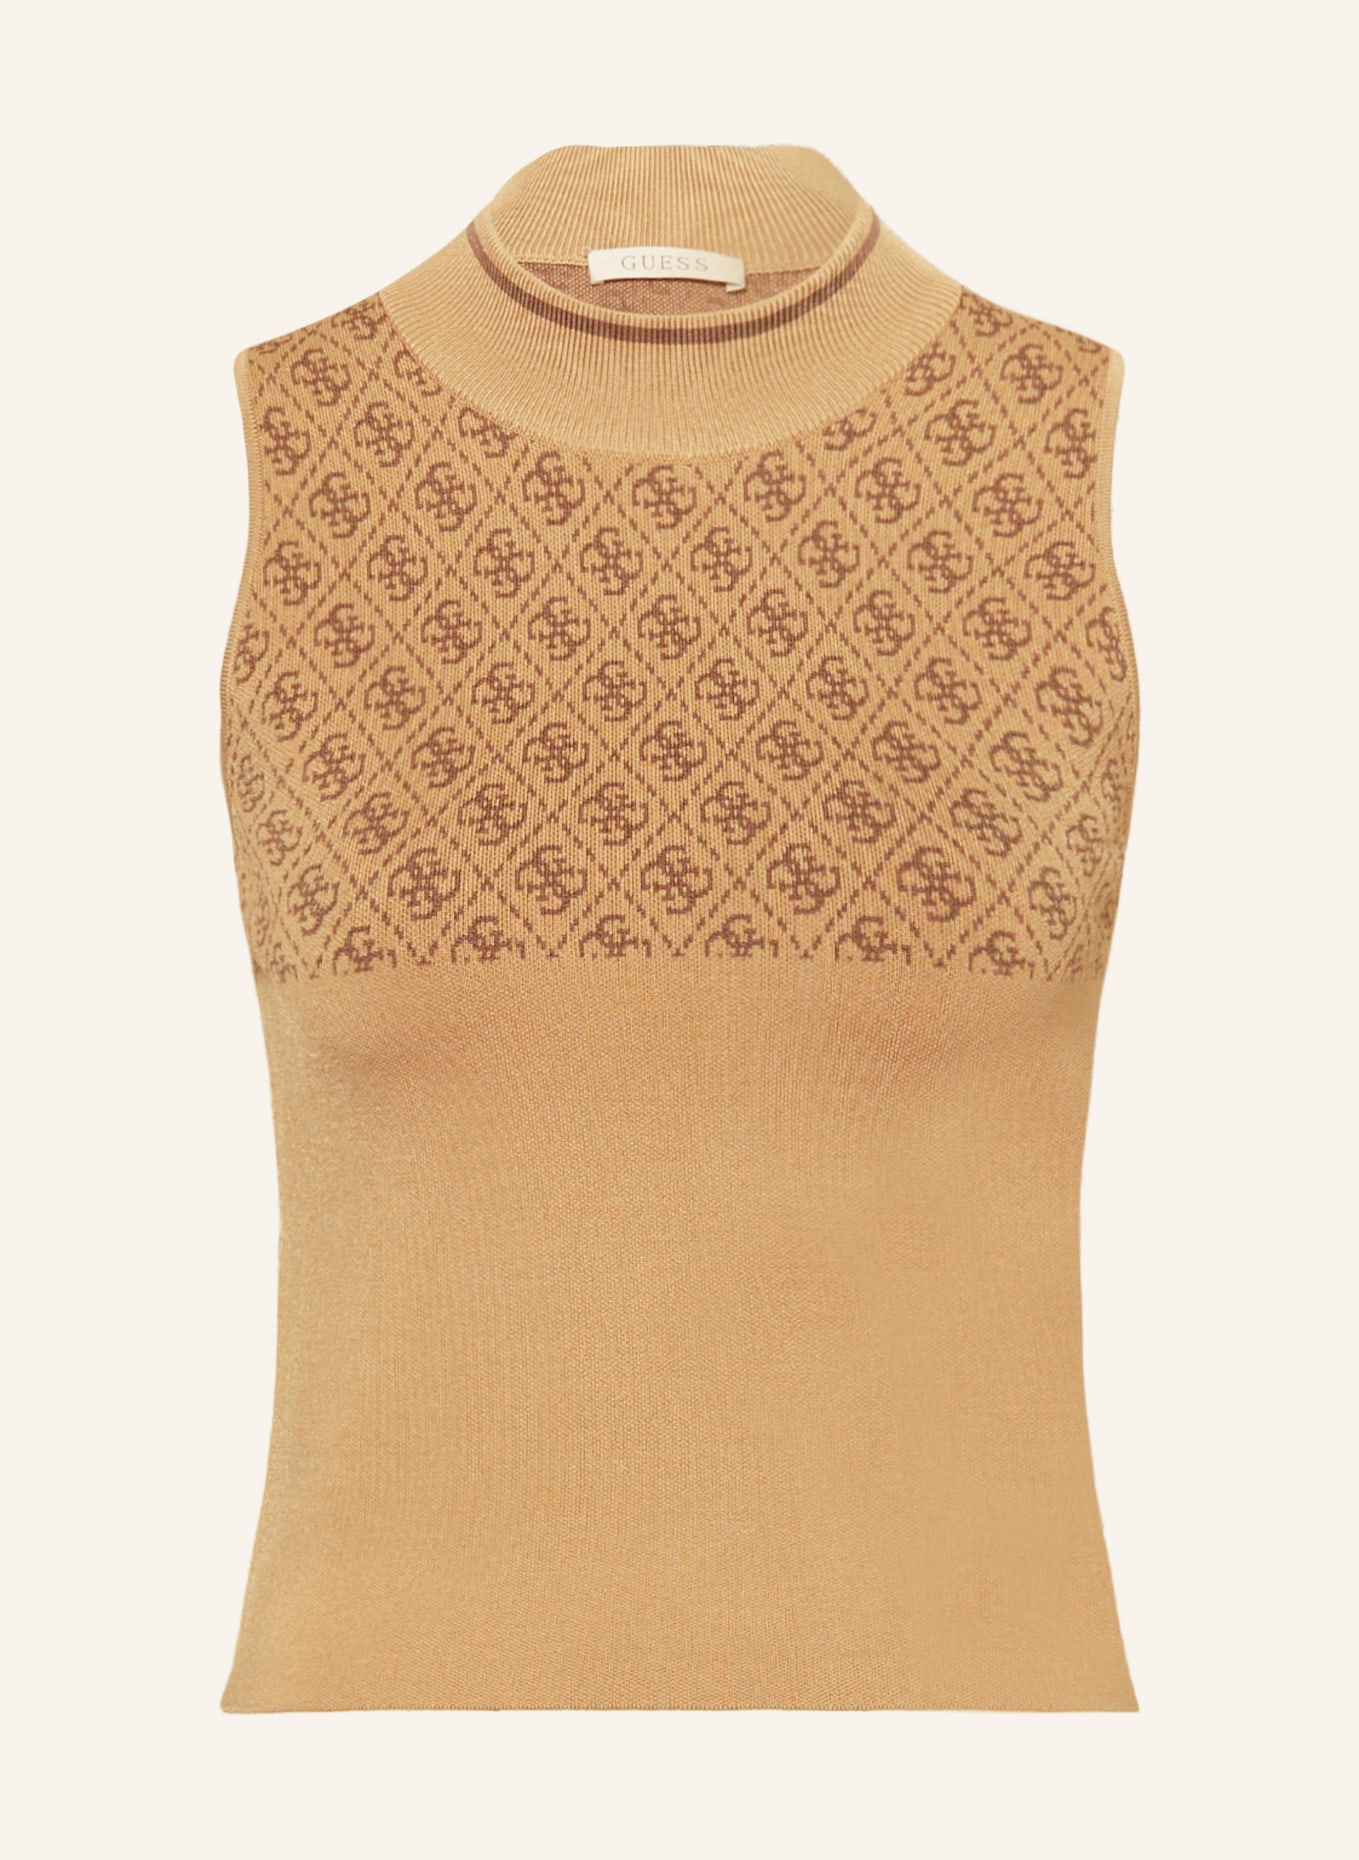 GUESS Stricktop, Farbe: CAMEL/ TAUPE (Bild 1)